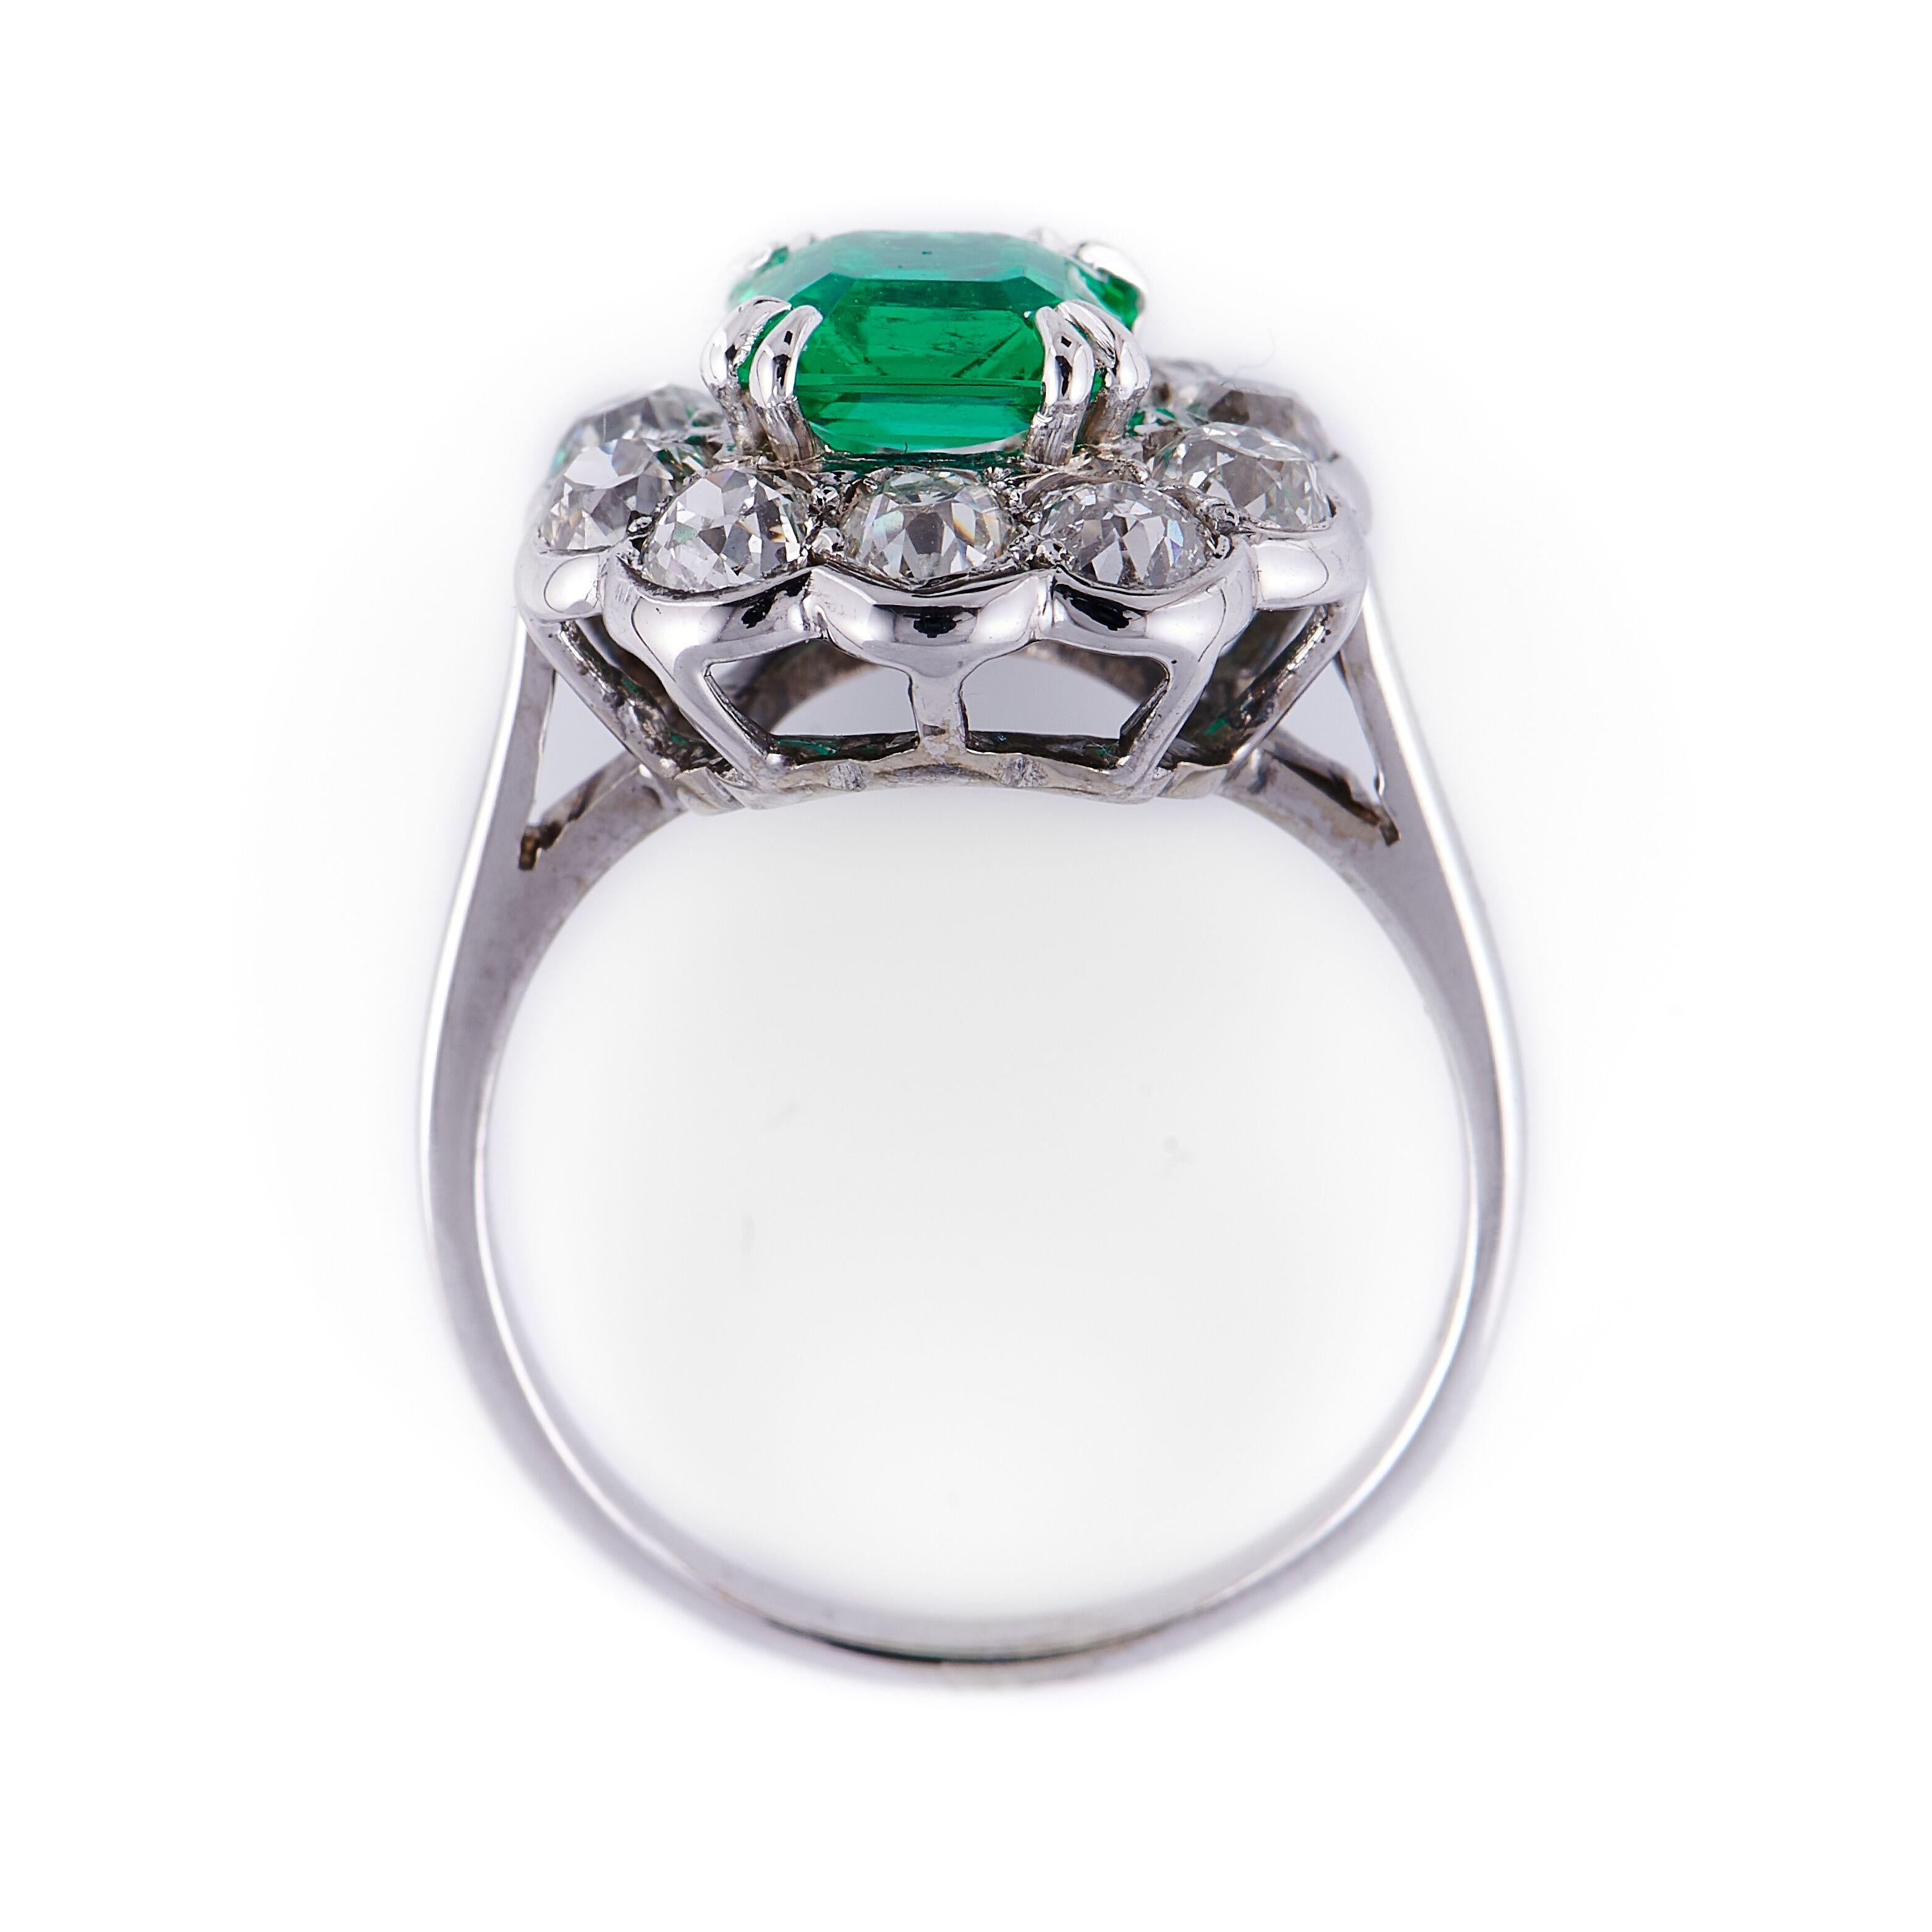 Women's Midcentury, 1940s 18 Carat White Gold Colombian Emerald and Diamond Cluster Ring